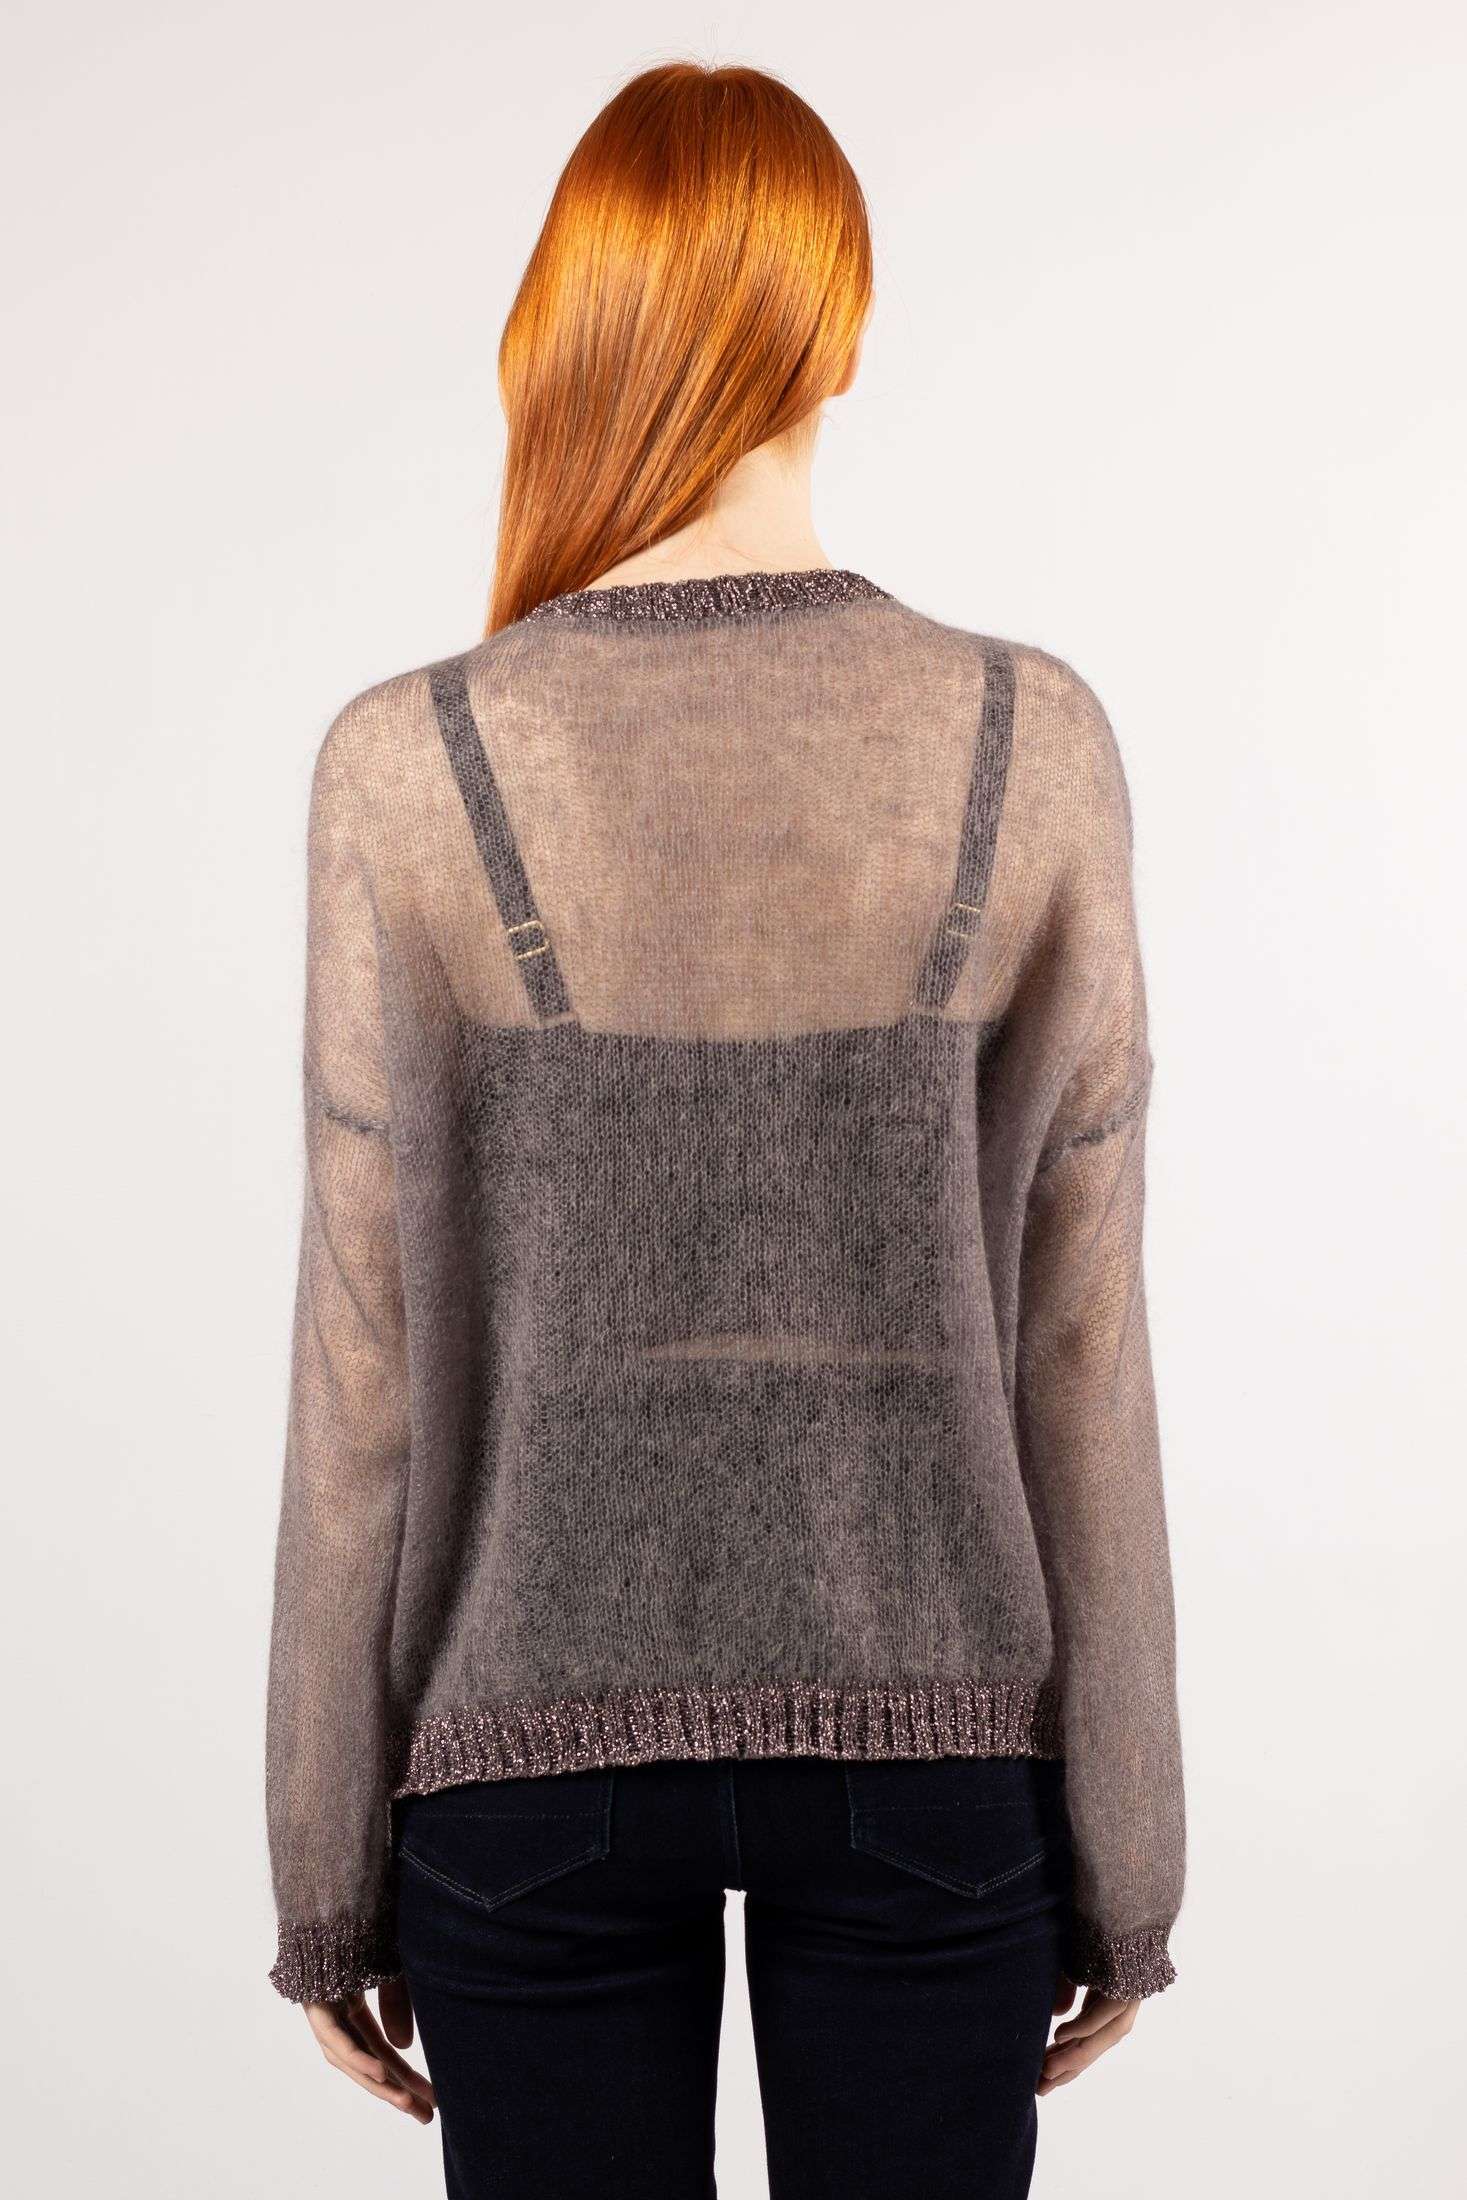 Luna: Luxurious warmth meets style in this brown mohair sweater with a transparent knit twist.